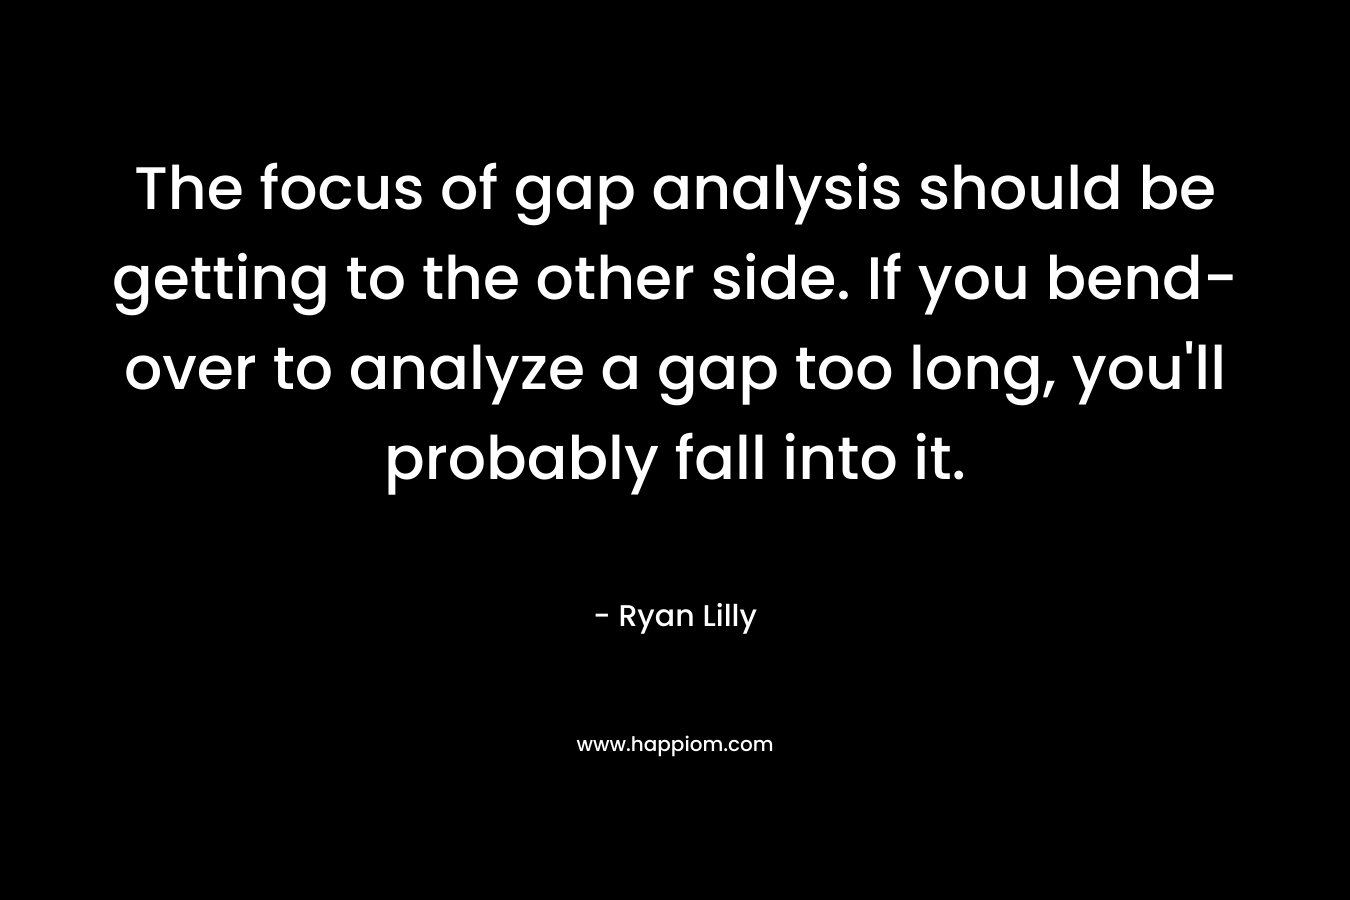 The focus of gap analysis should be getting to the other side. If you bend-over to analyze a gap too long, you'll probably fall into it.